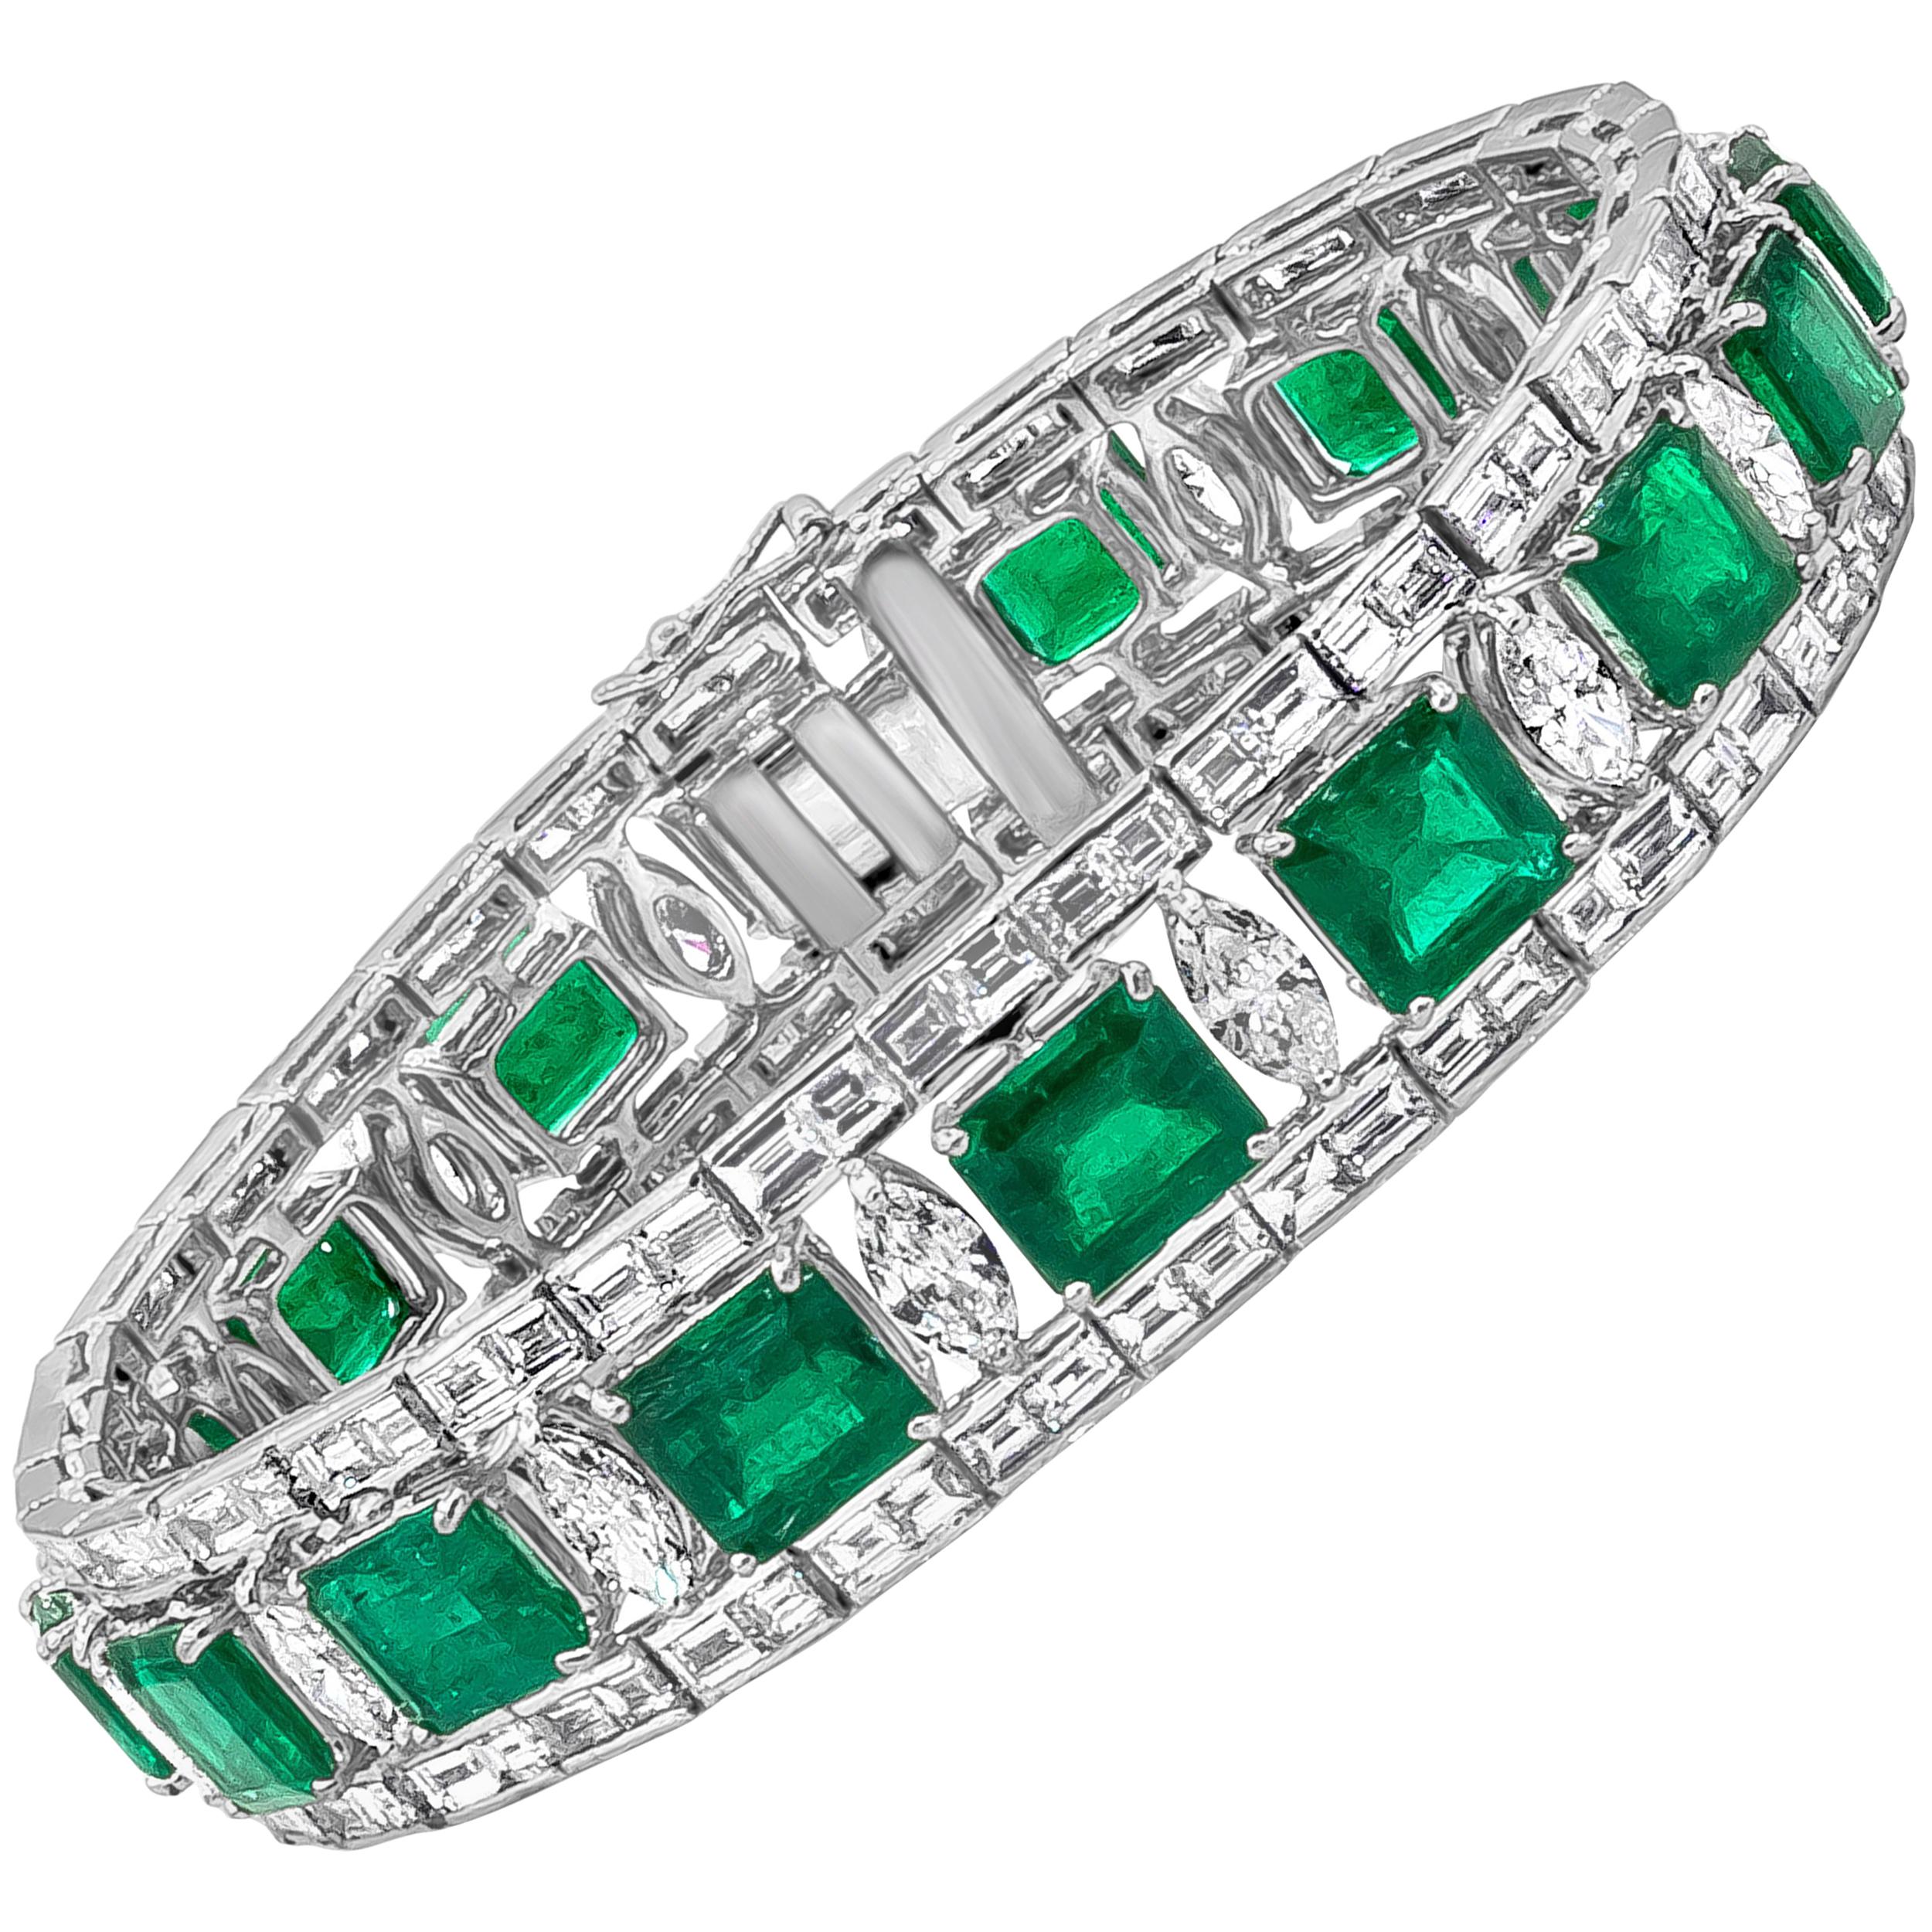 34.49 Carat Total Green Emerald and Mixed Cut White Diamonds Bracelet For Sale